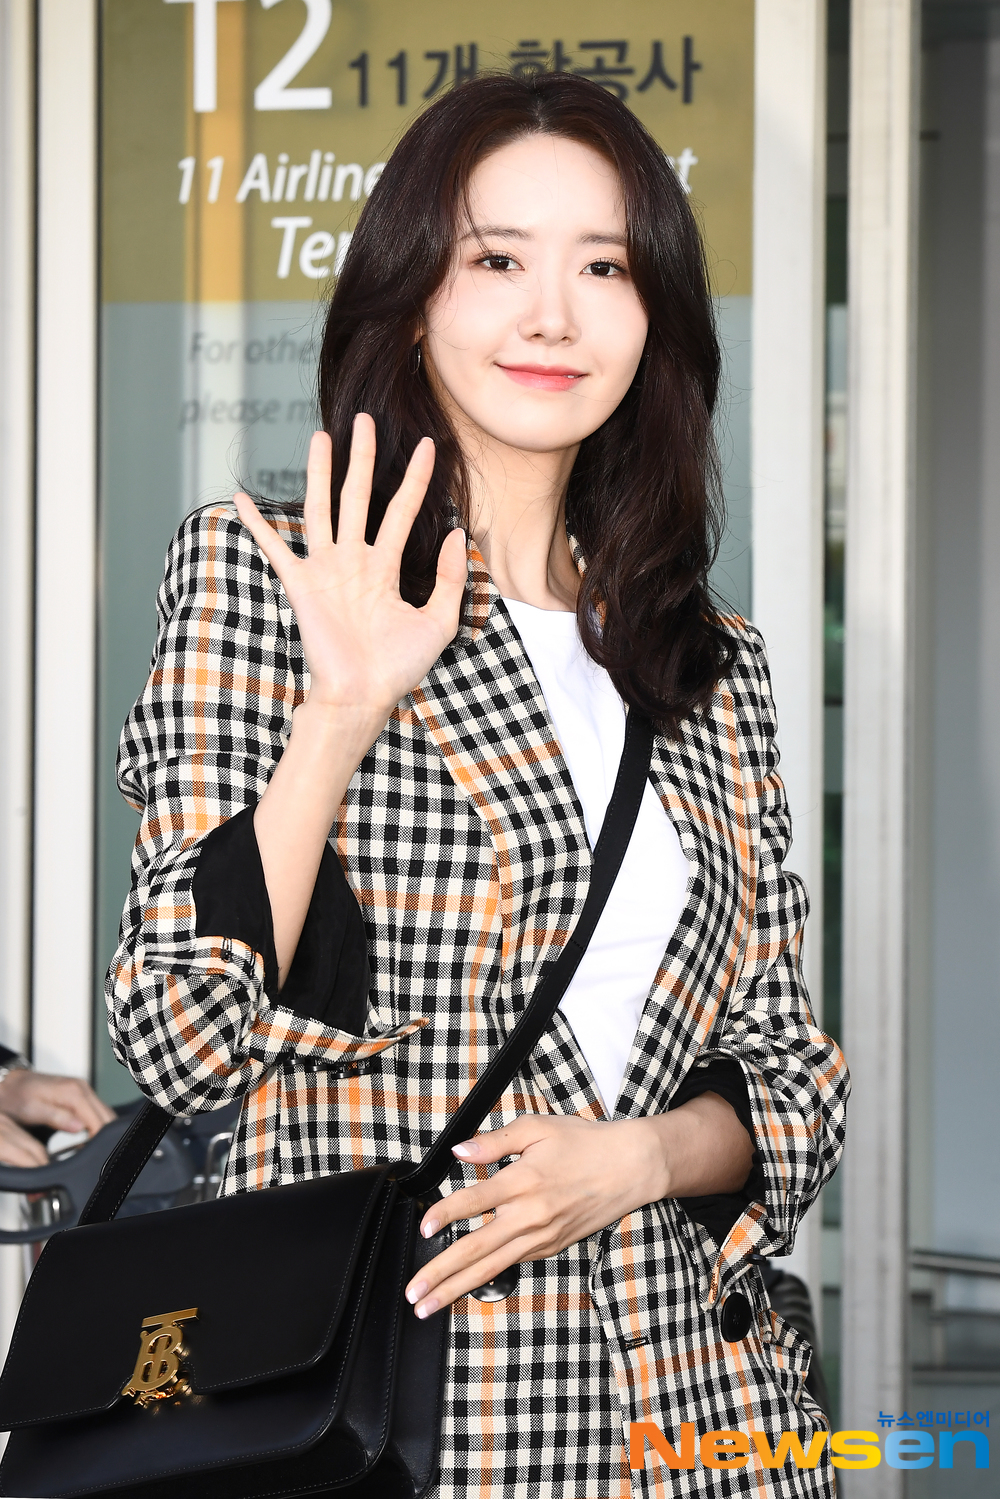 <p>Girls Generation(SNSD) member Im Yoon-ah(YoonA)3 29 PM Incheon Jung-operation in Incheon International Airport through promotions and events to attend car Singapore departure.</p><p>Girls Generation(SNSD) member Im Yoon-ah airport fashion and Singapore with departure.</p>